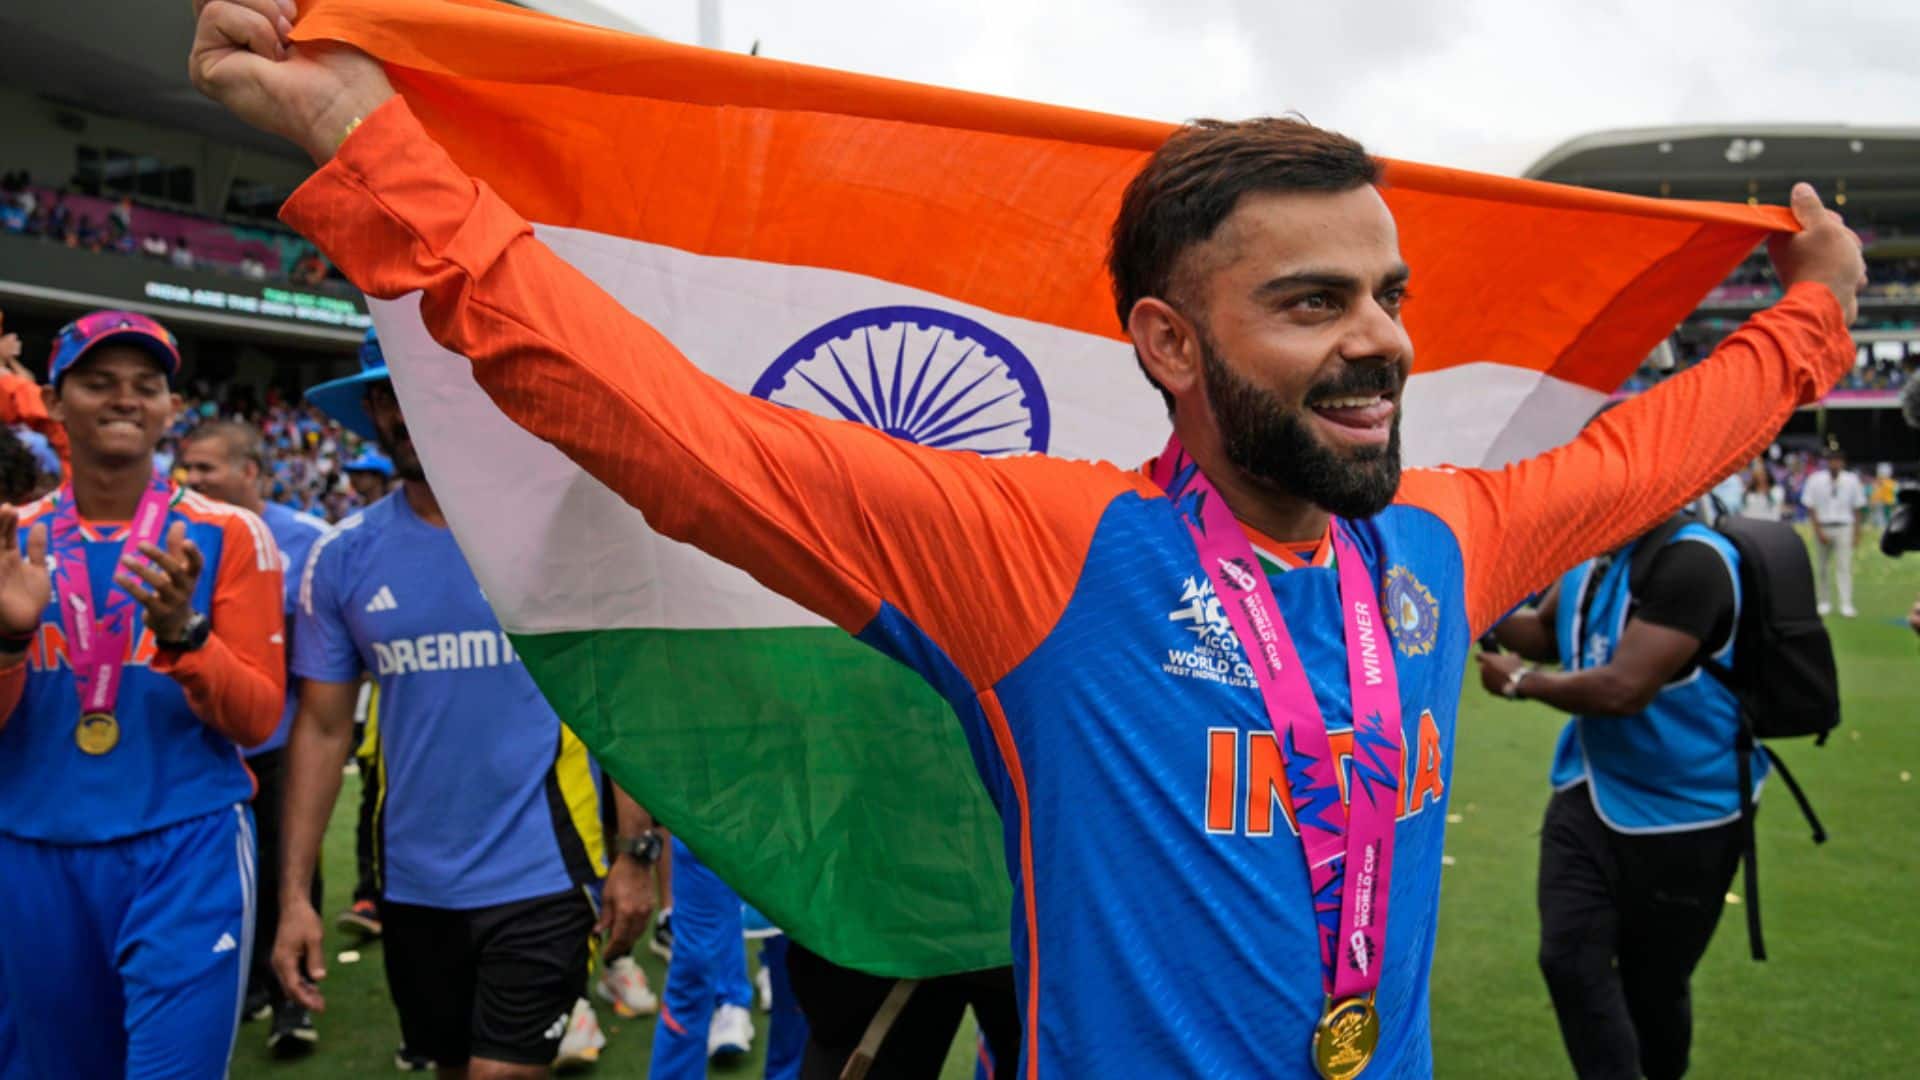 [Watch] 'Fans Are Disappointed,' Virat Kohli’s Childhood Coach On His Retirement After T20 WC Win